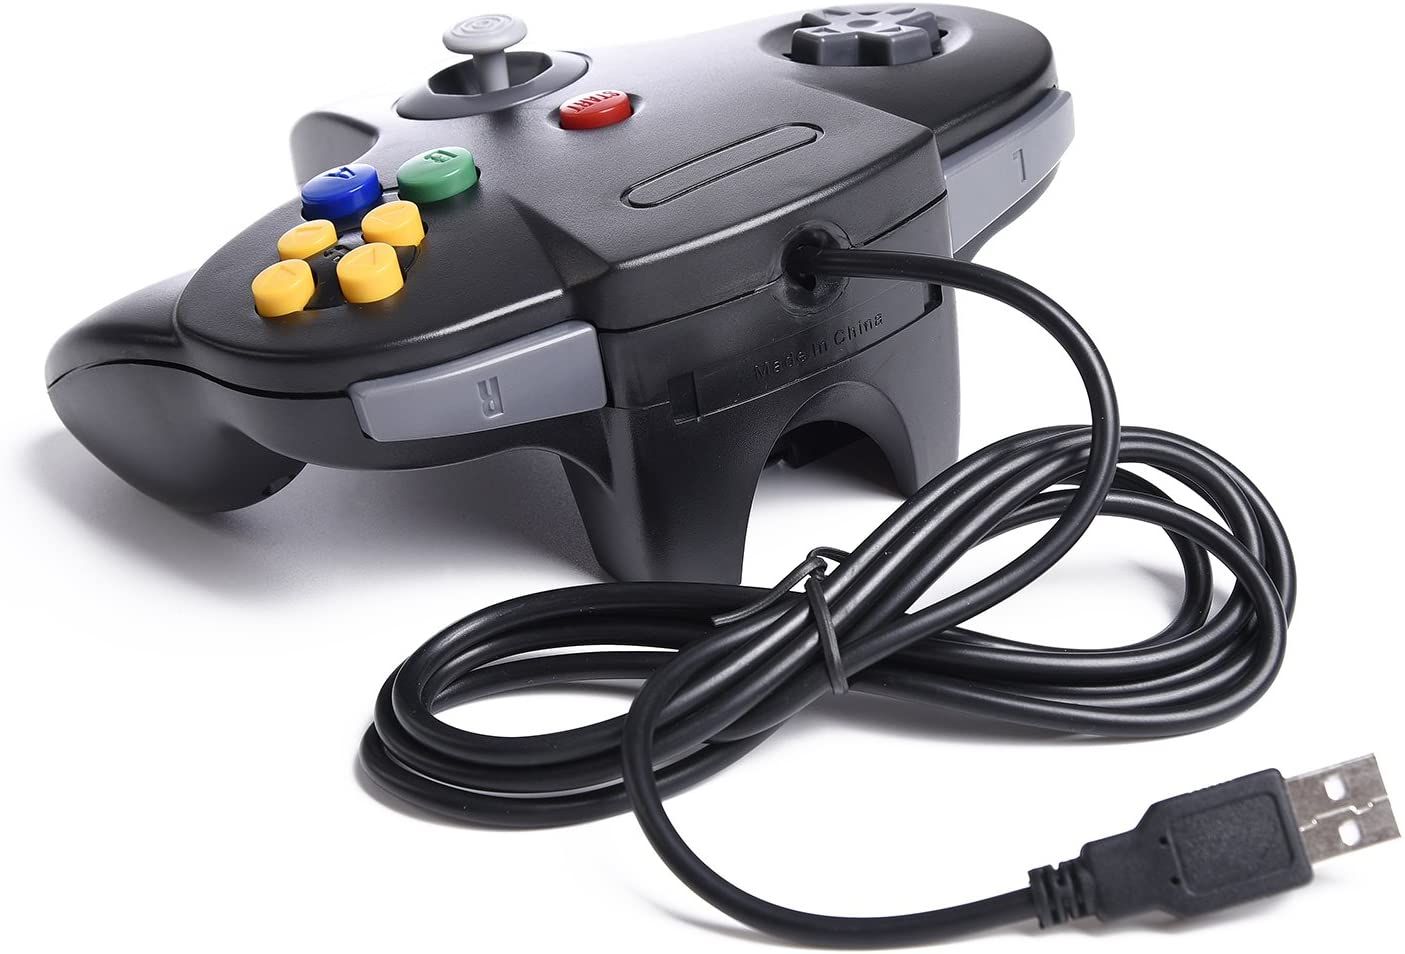 make tomee snes usb controller work as an xbox controller on pc